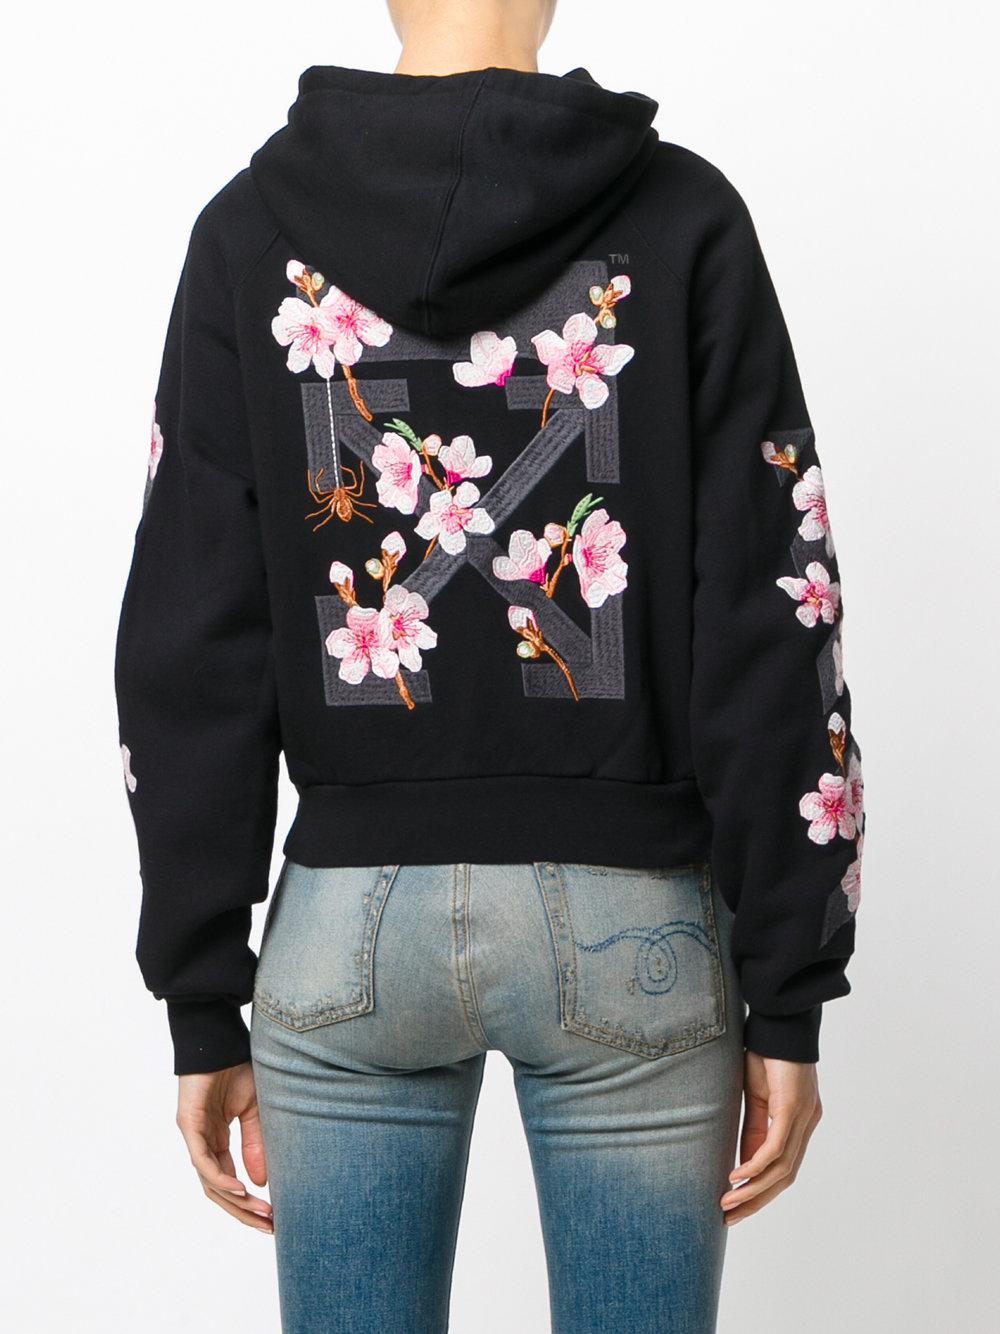 Off-White c/o Virgil Abloh Cotton Global Warming Blossom Hoodie in ...